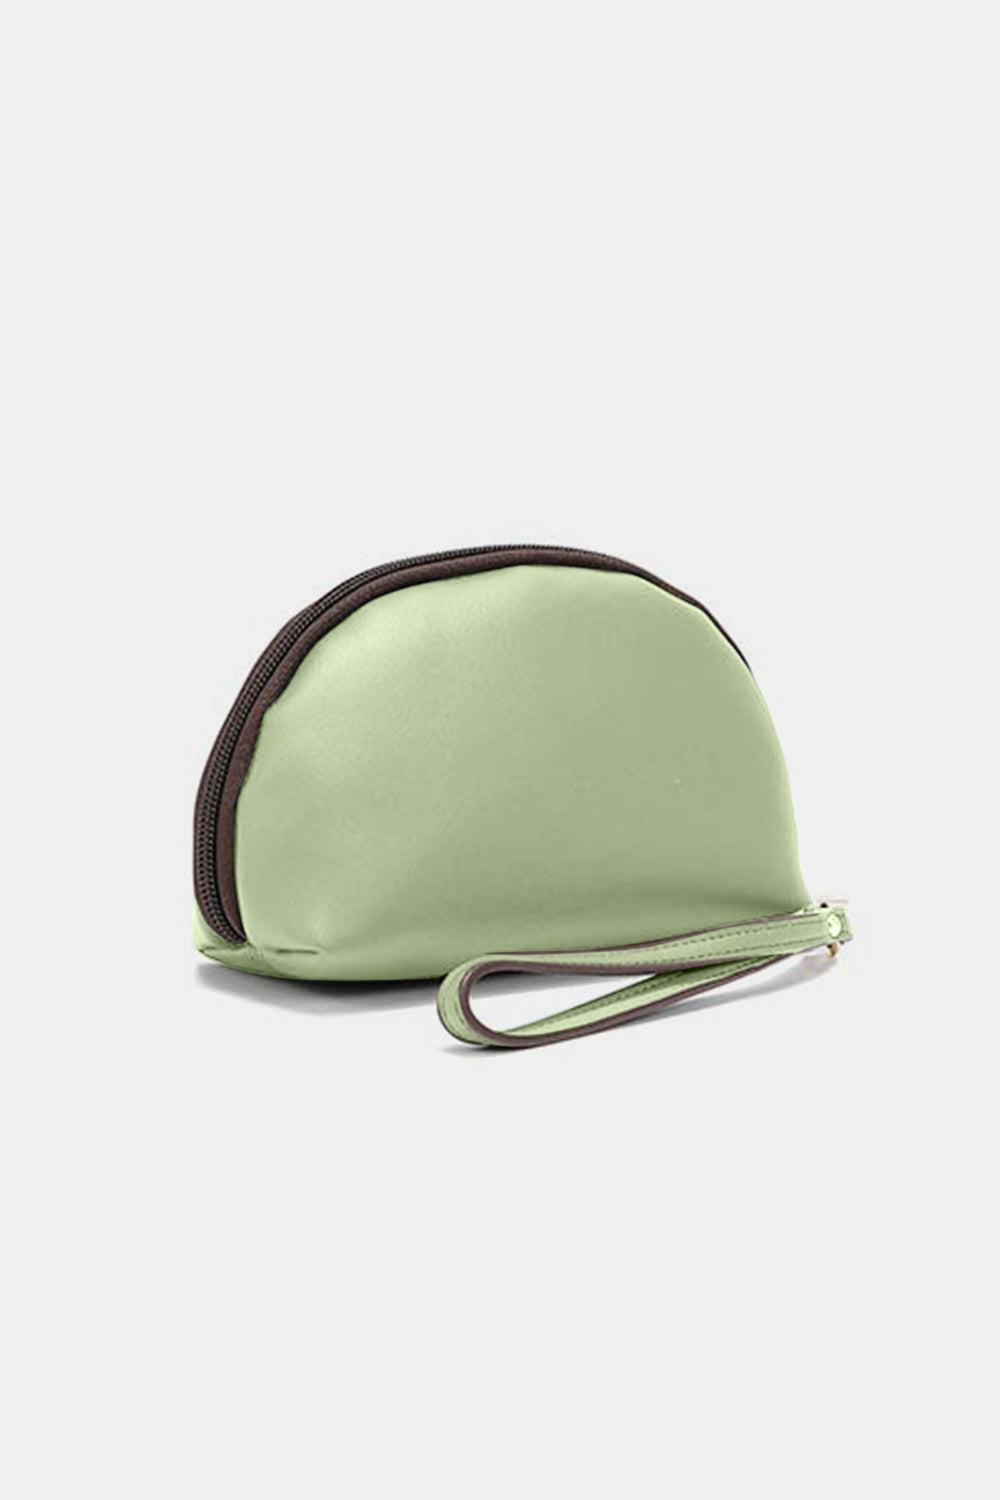 a small green purse sitting on top of a white table